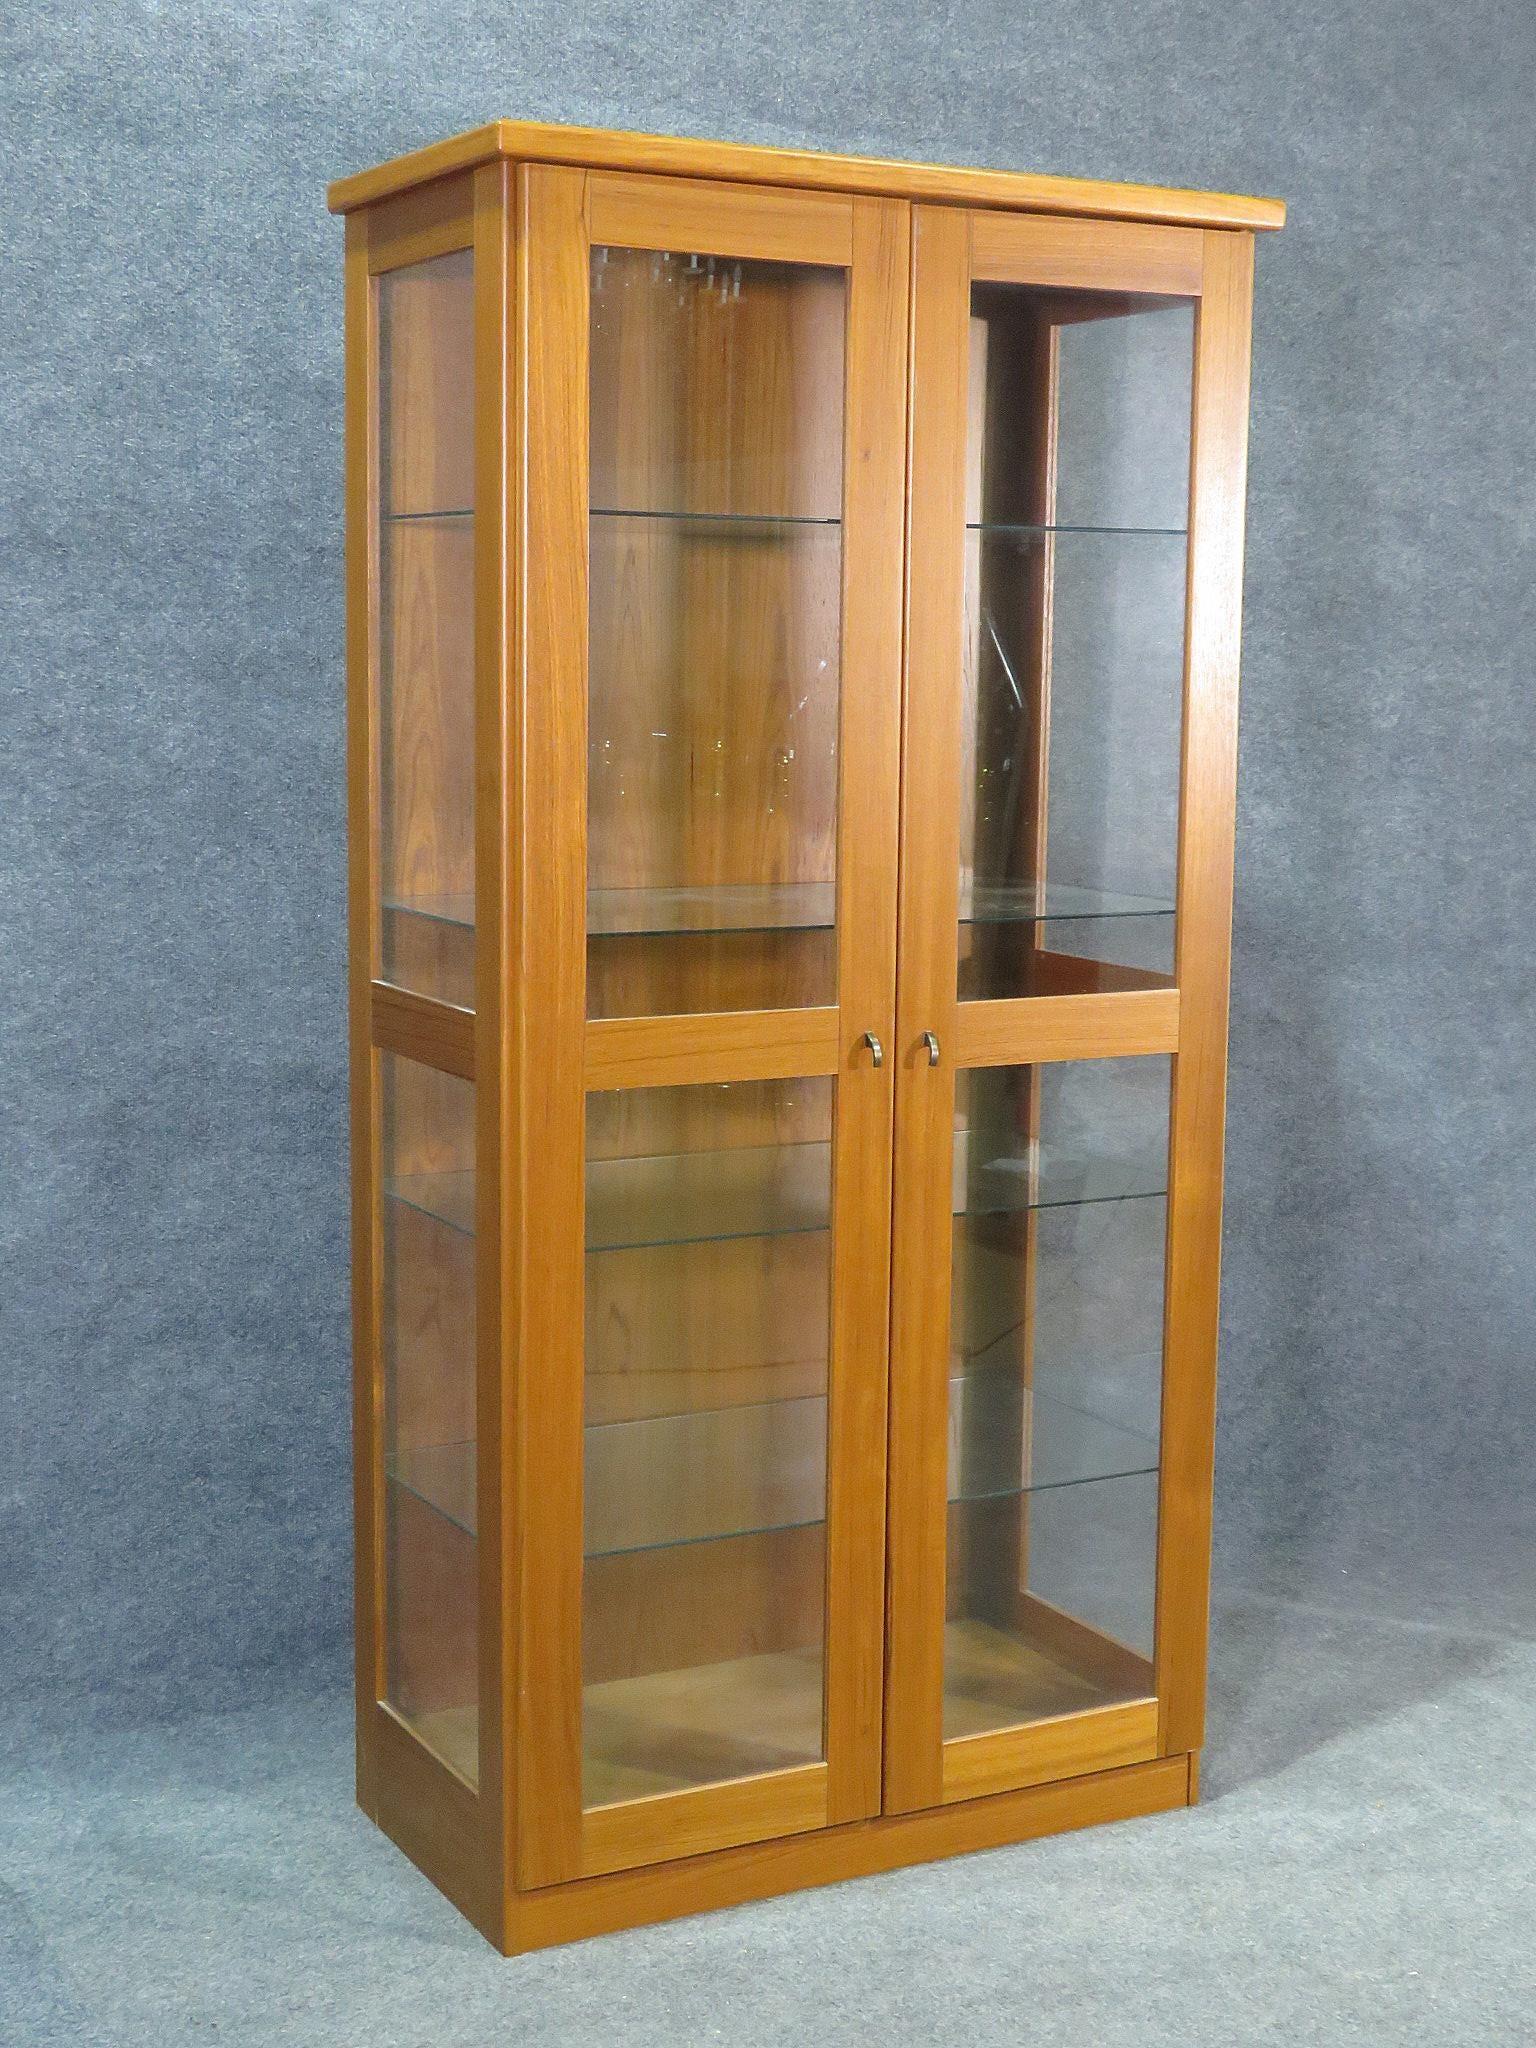 An elegant Mid-Century Modern cabinet with four glass shelves and interior lighting, this piece is perfect for displaying china or other decorative items. Please confirm item location with seller (NY/NJ).